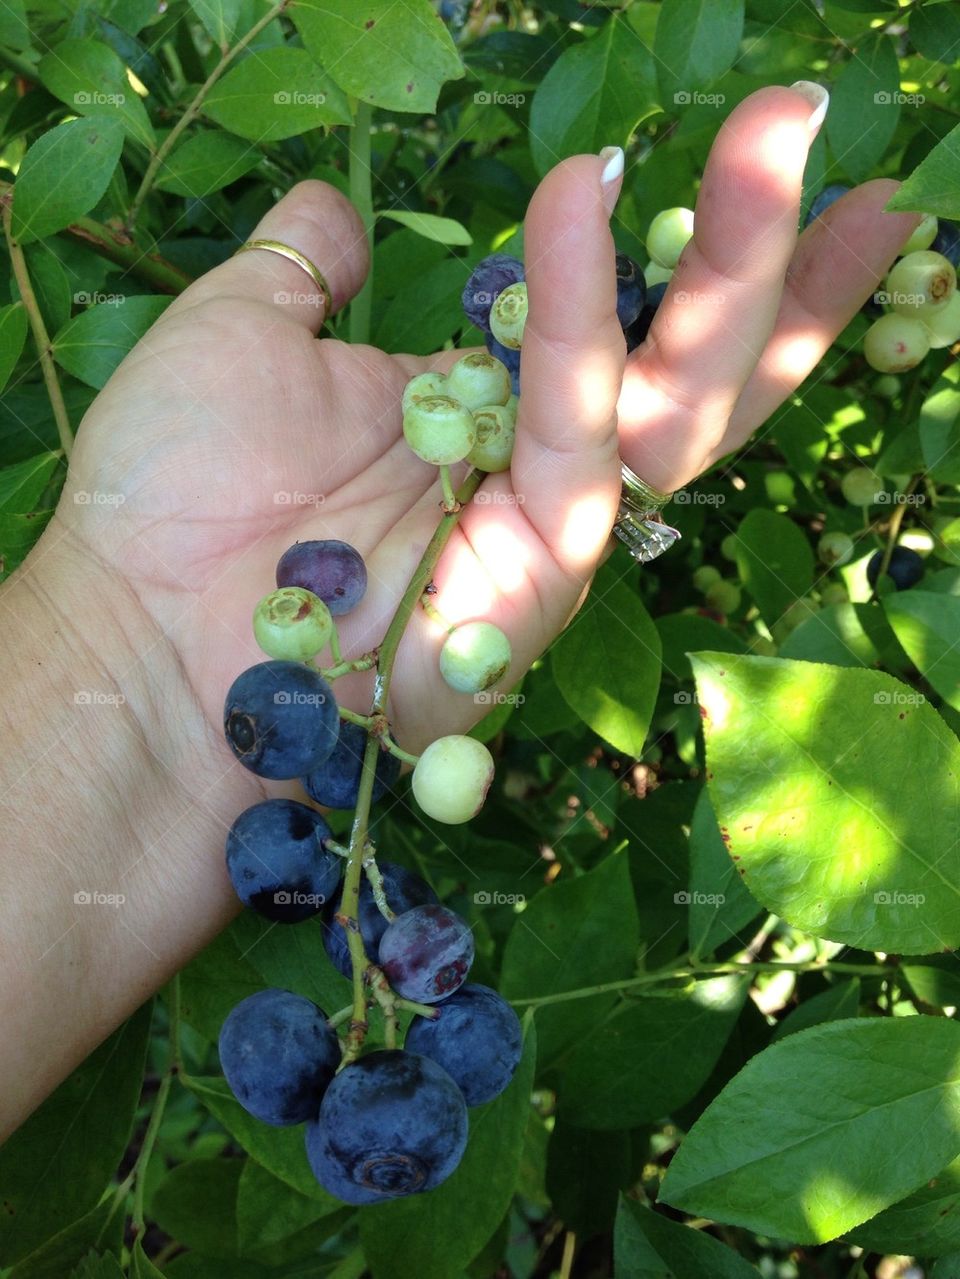 Blueberries in Hand